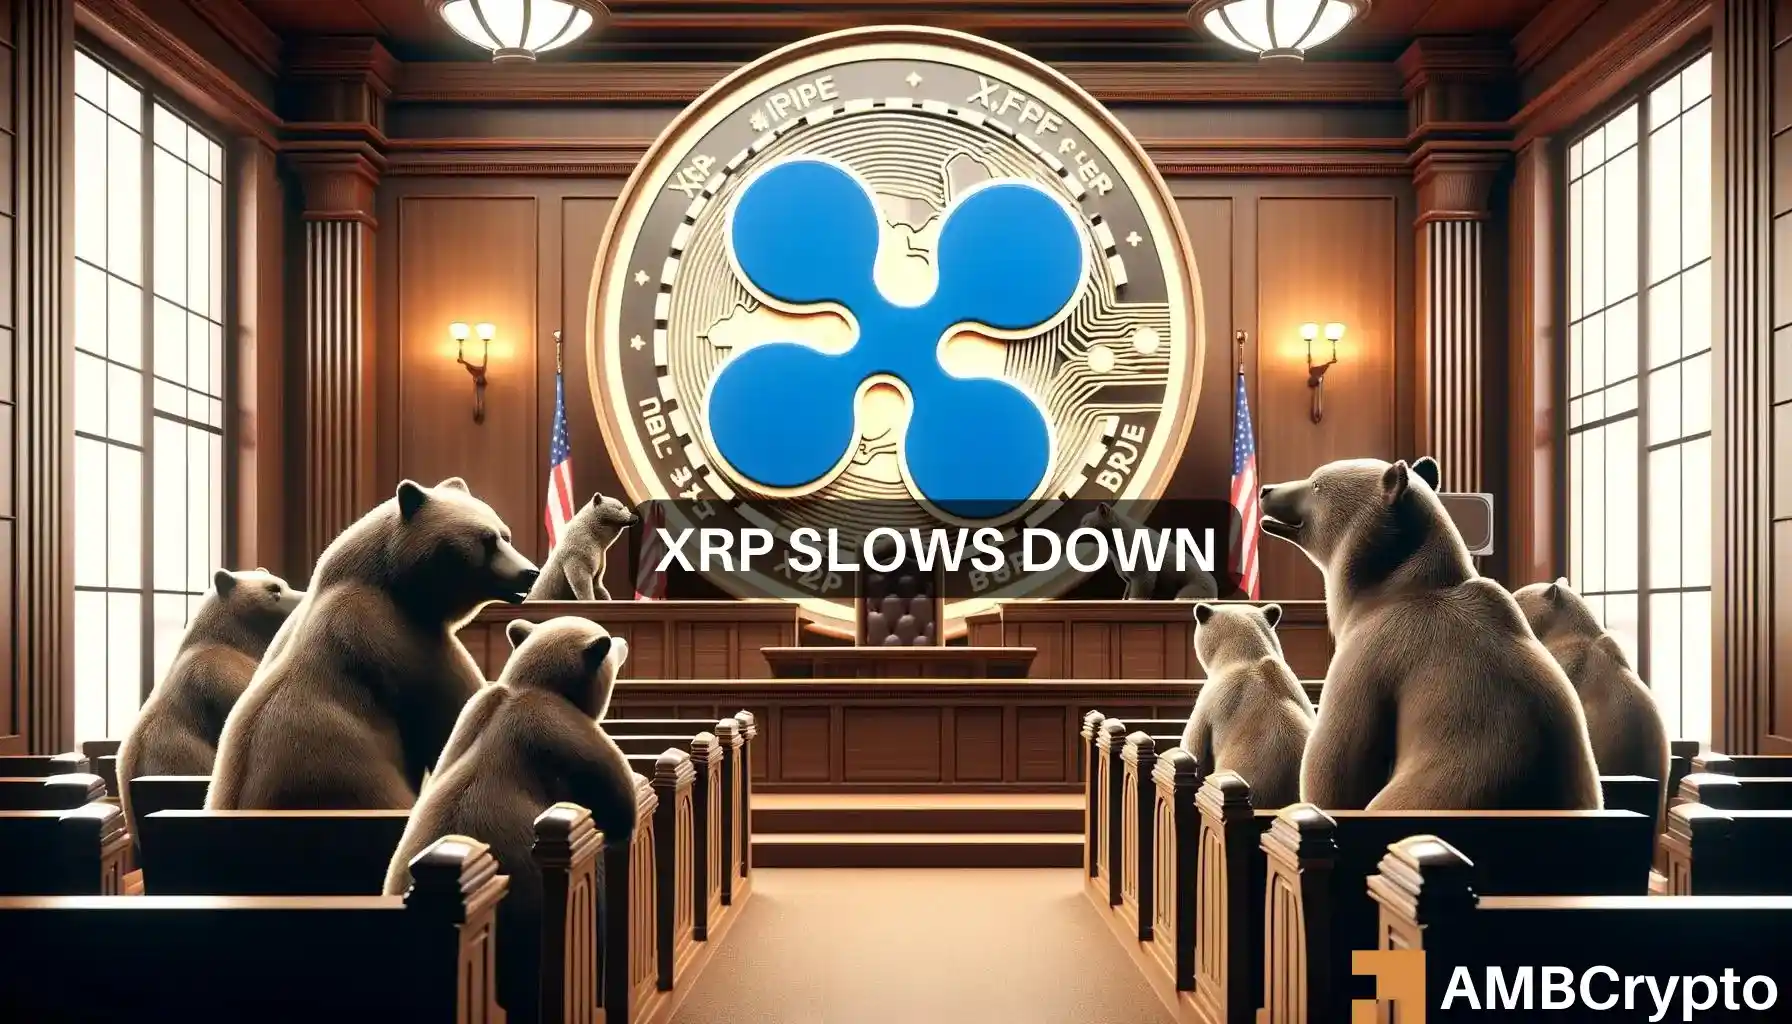 Will XRP fall below $0.51? Here’s why next 7 days are important